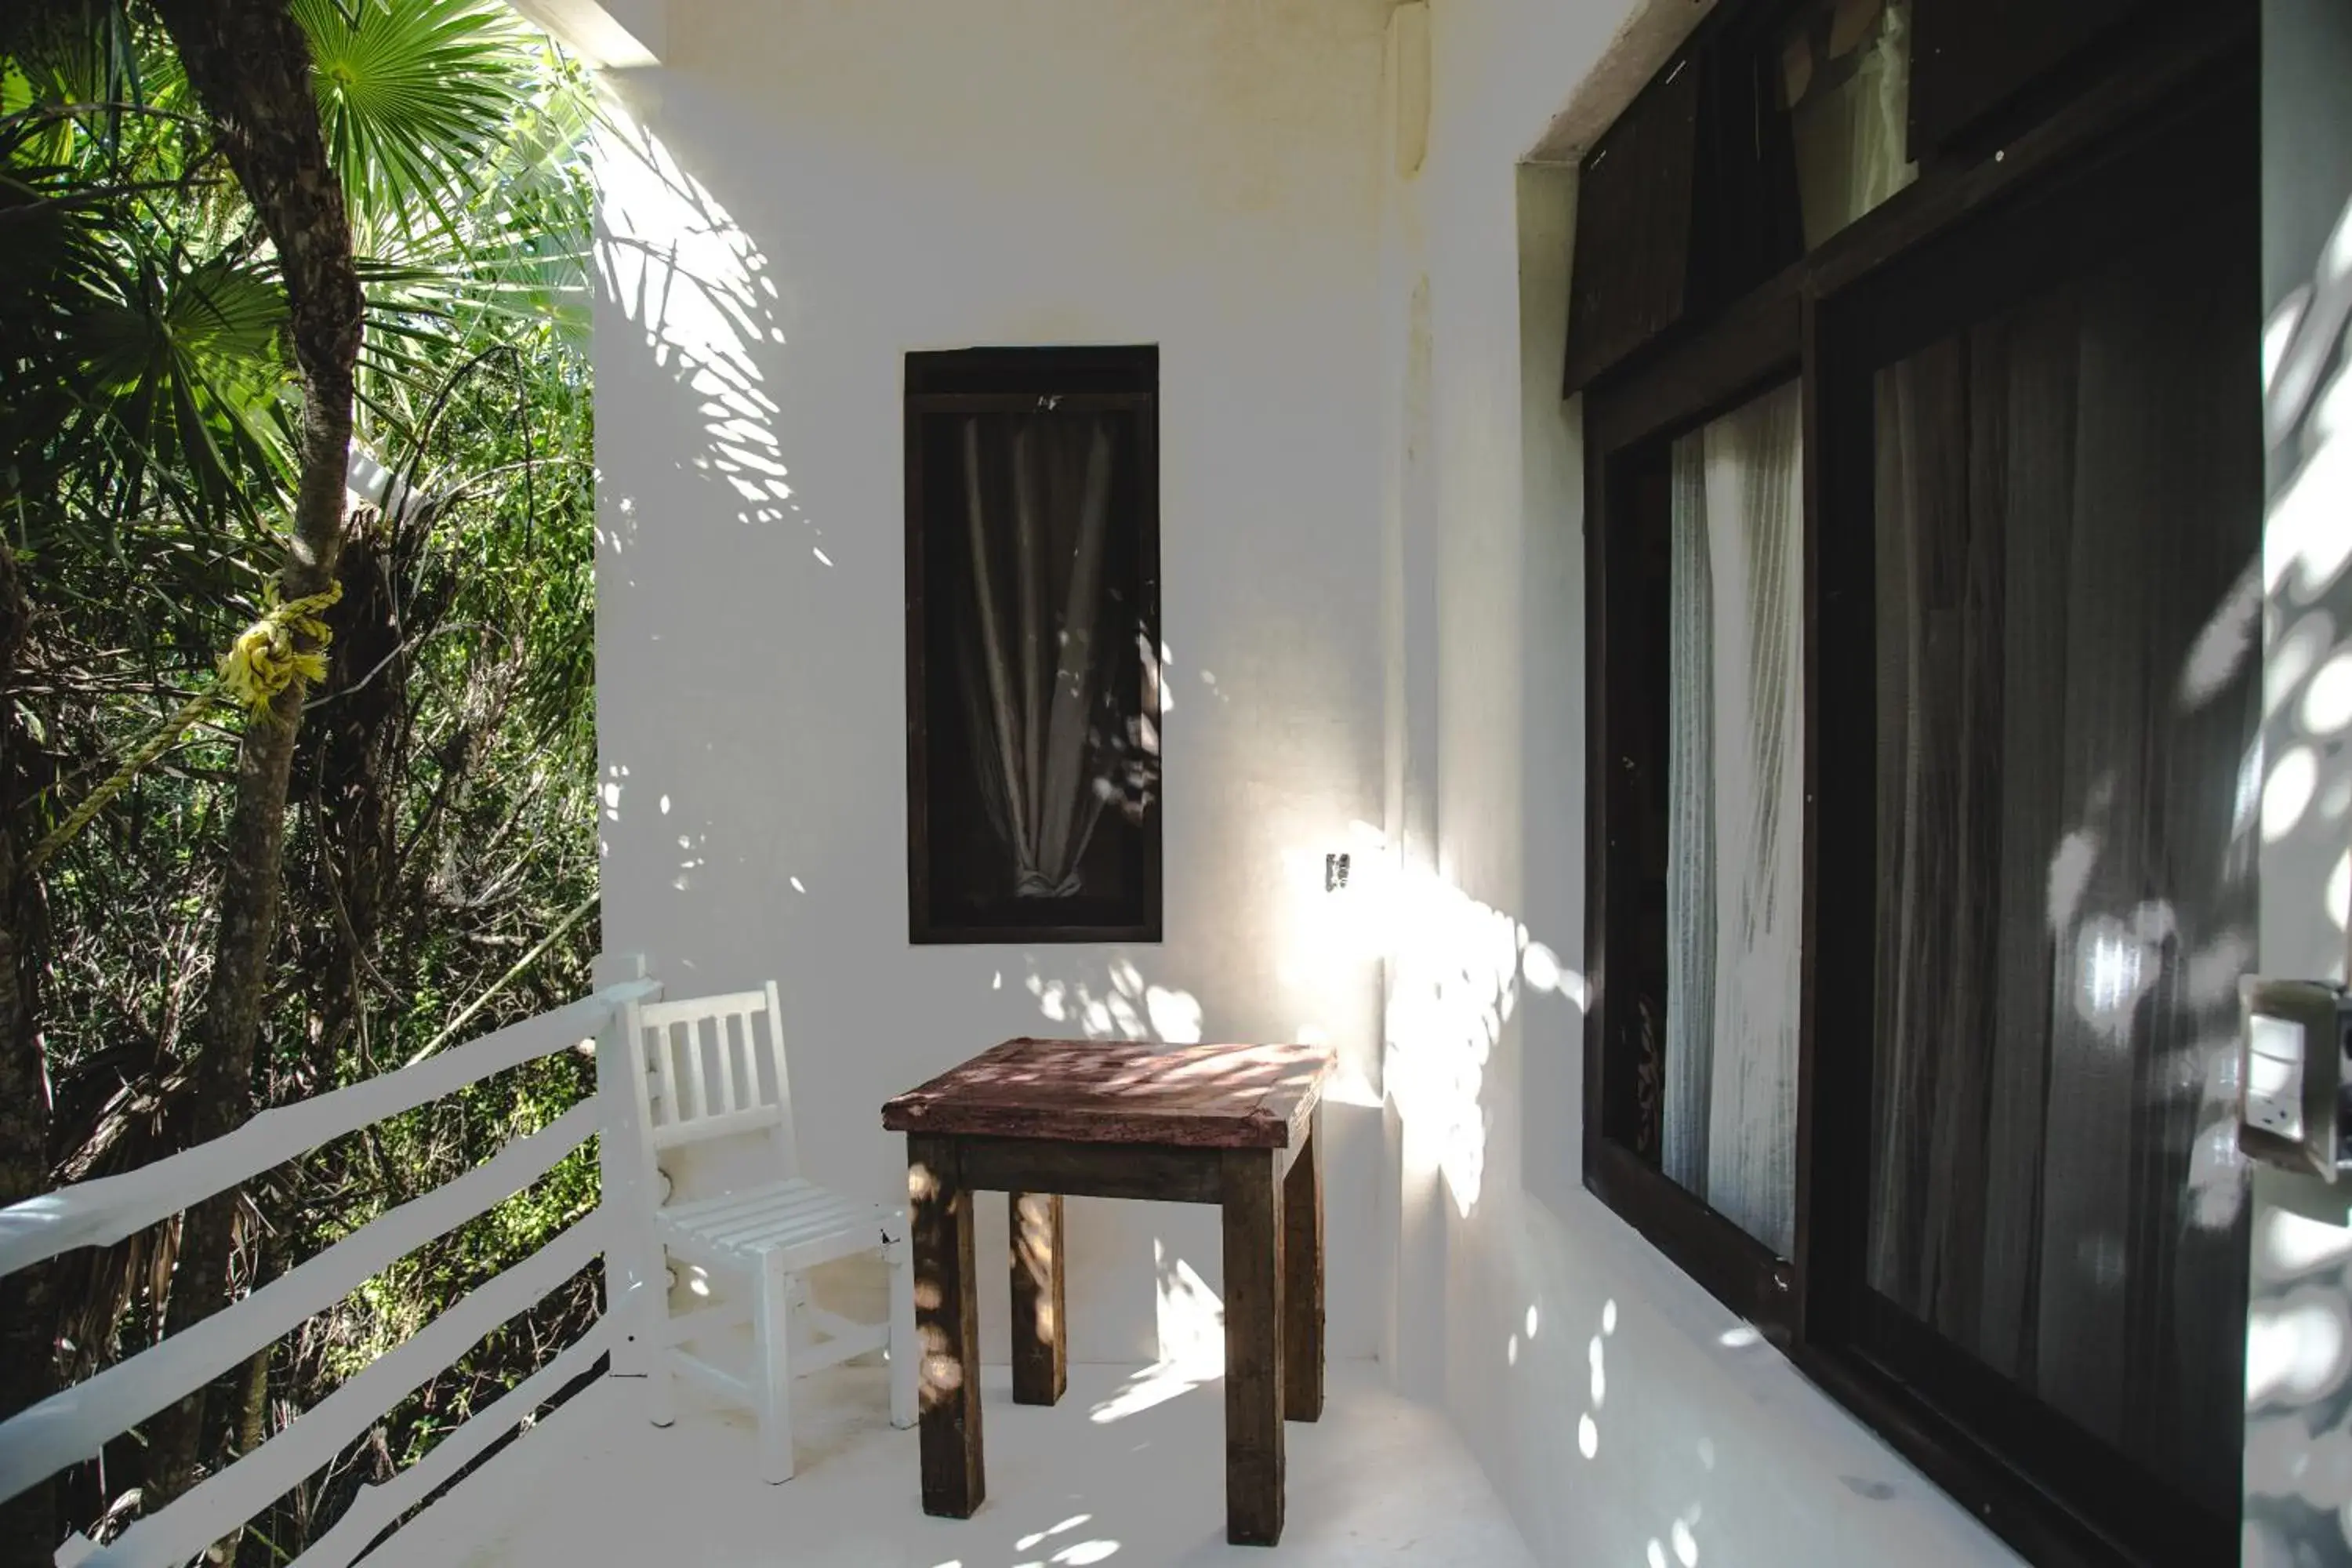 Balcony/Terrace in Casa Ambar Tulum - Great location and access to a Private Cenote & Beach 2 Km Away - Adults Only